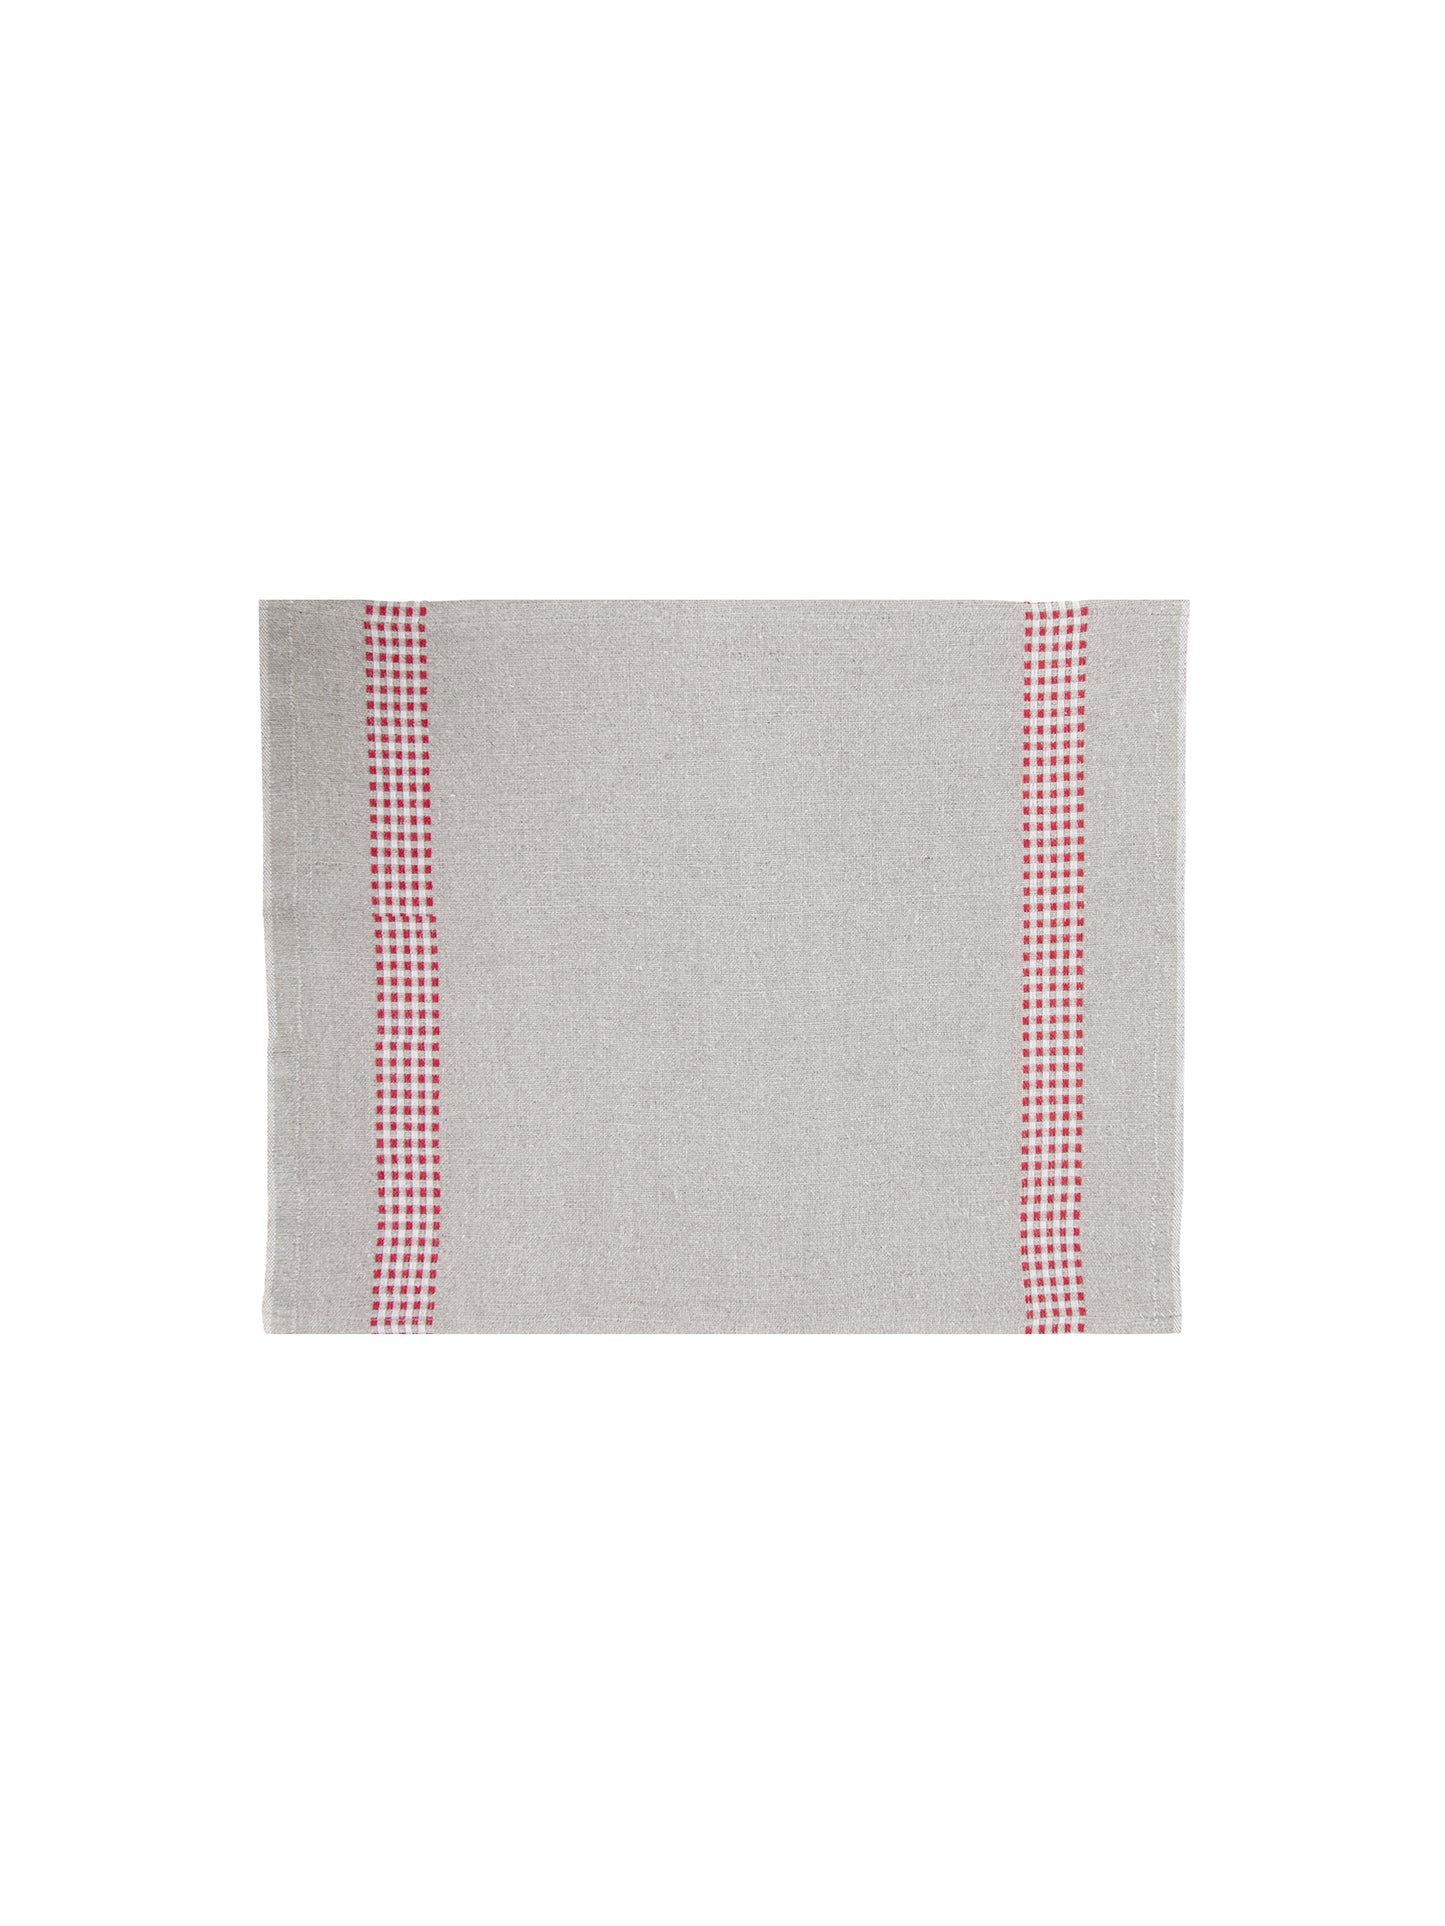 Charvet Editions Vichy Red Linens Placemats Weston Table